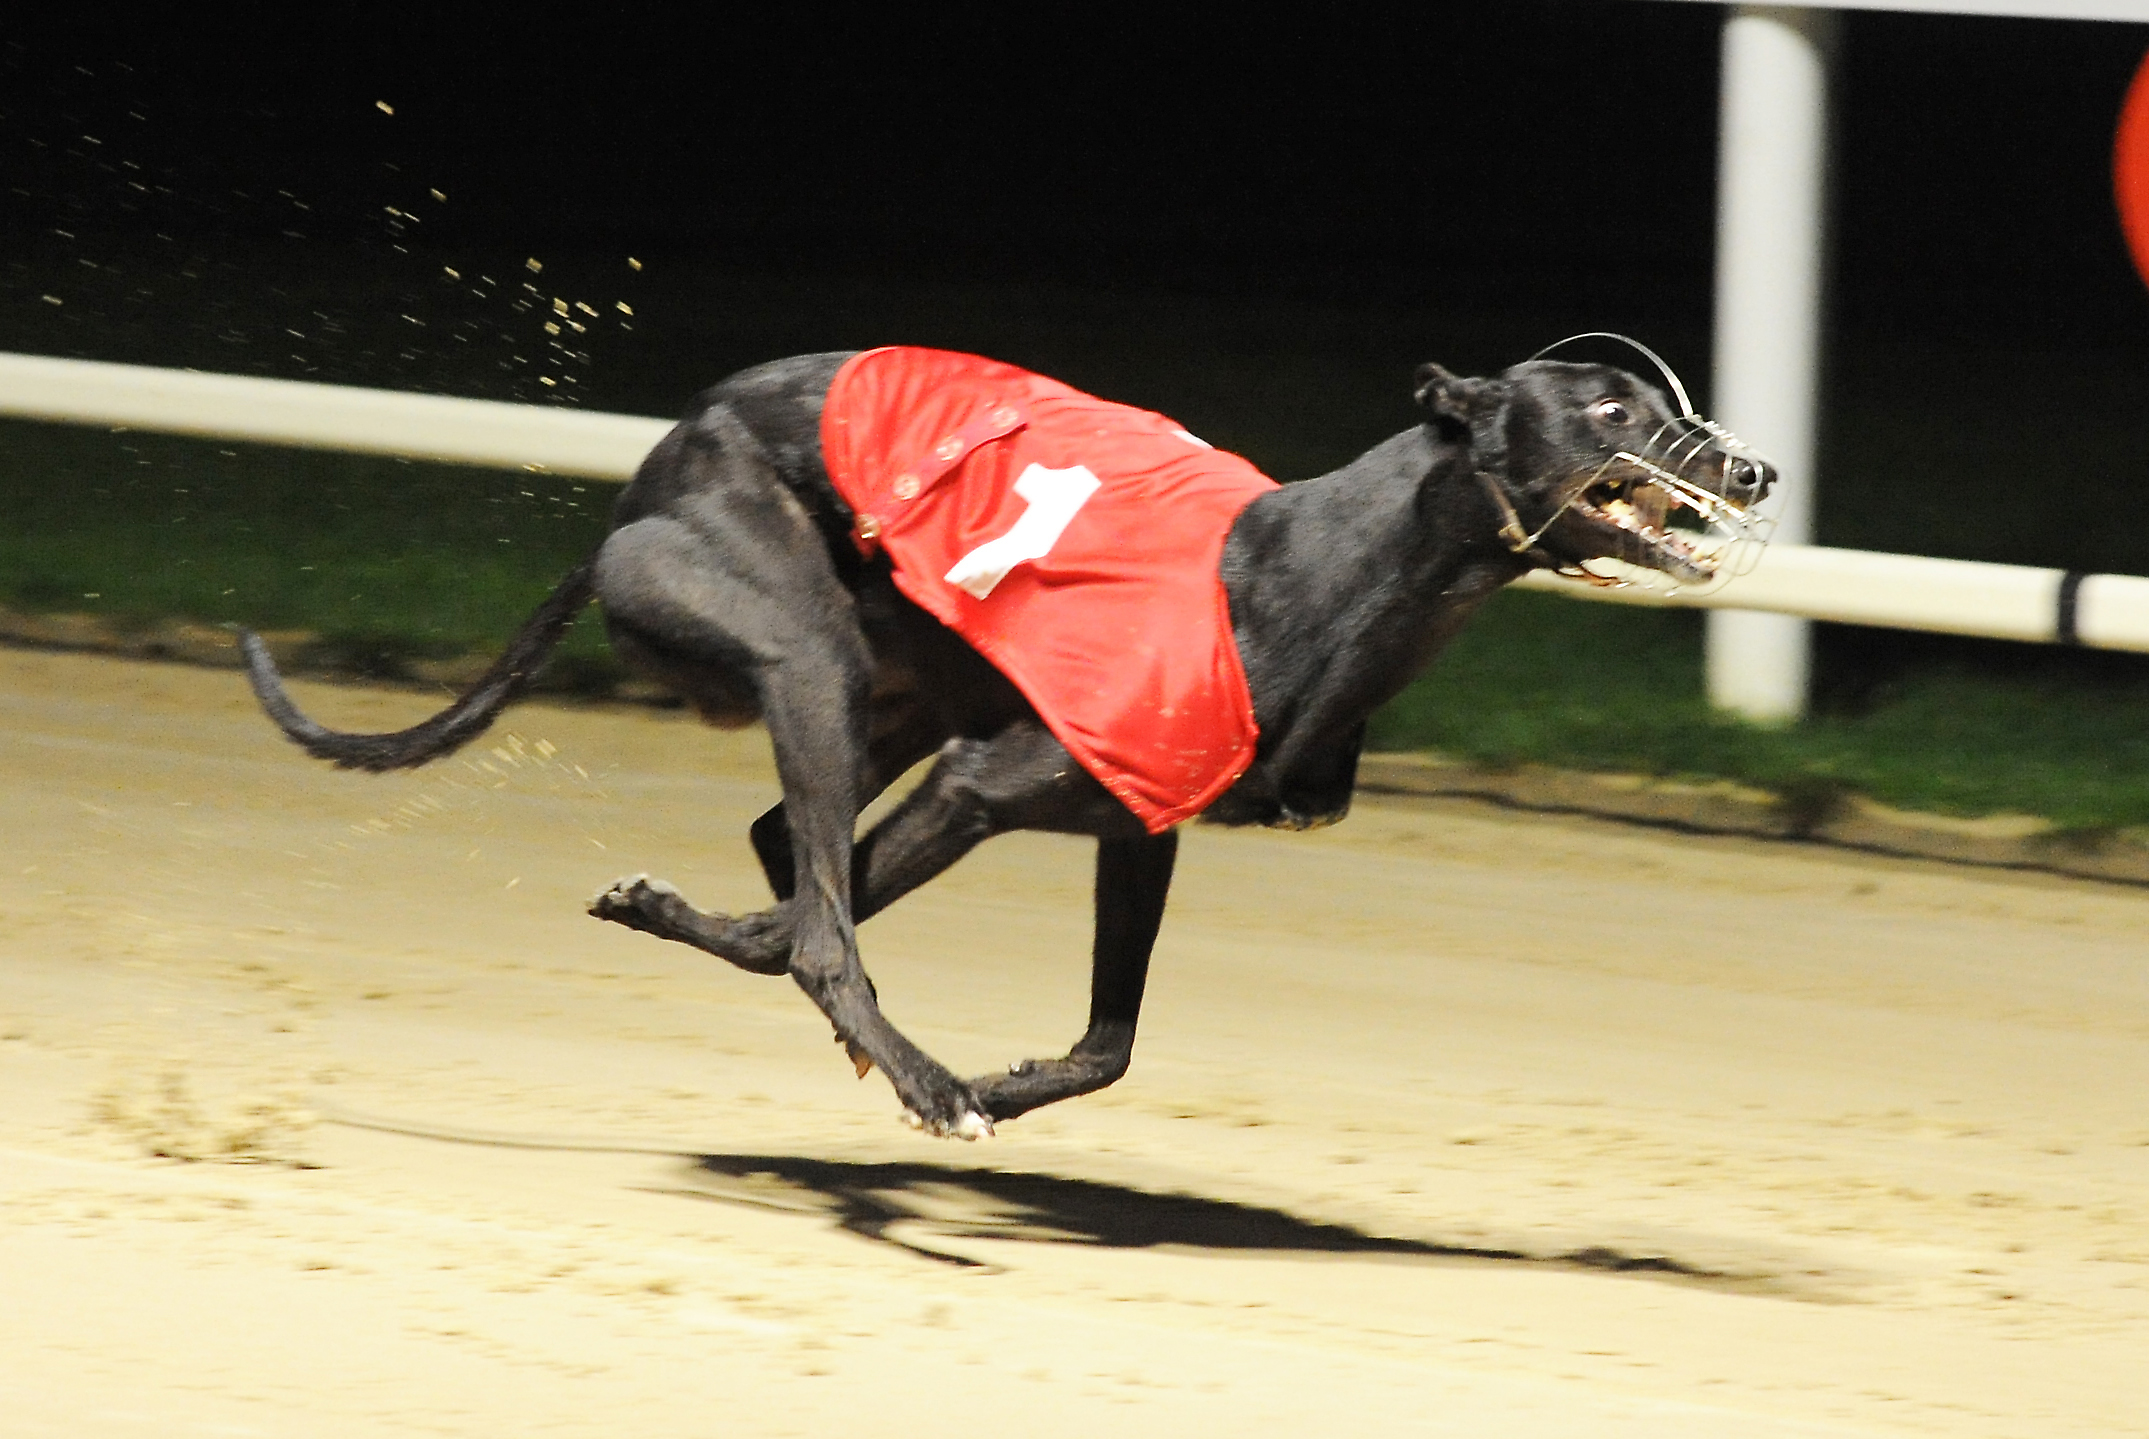 Lightfoot King Sale Quashed By Derby Rule Greyhound Star News From The Greyhound Industry